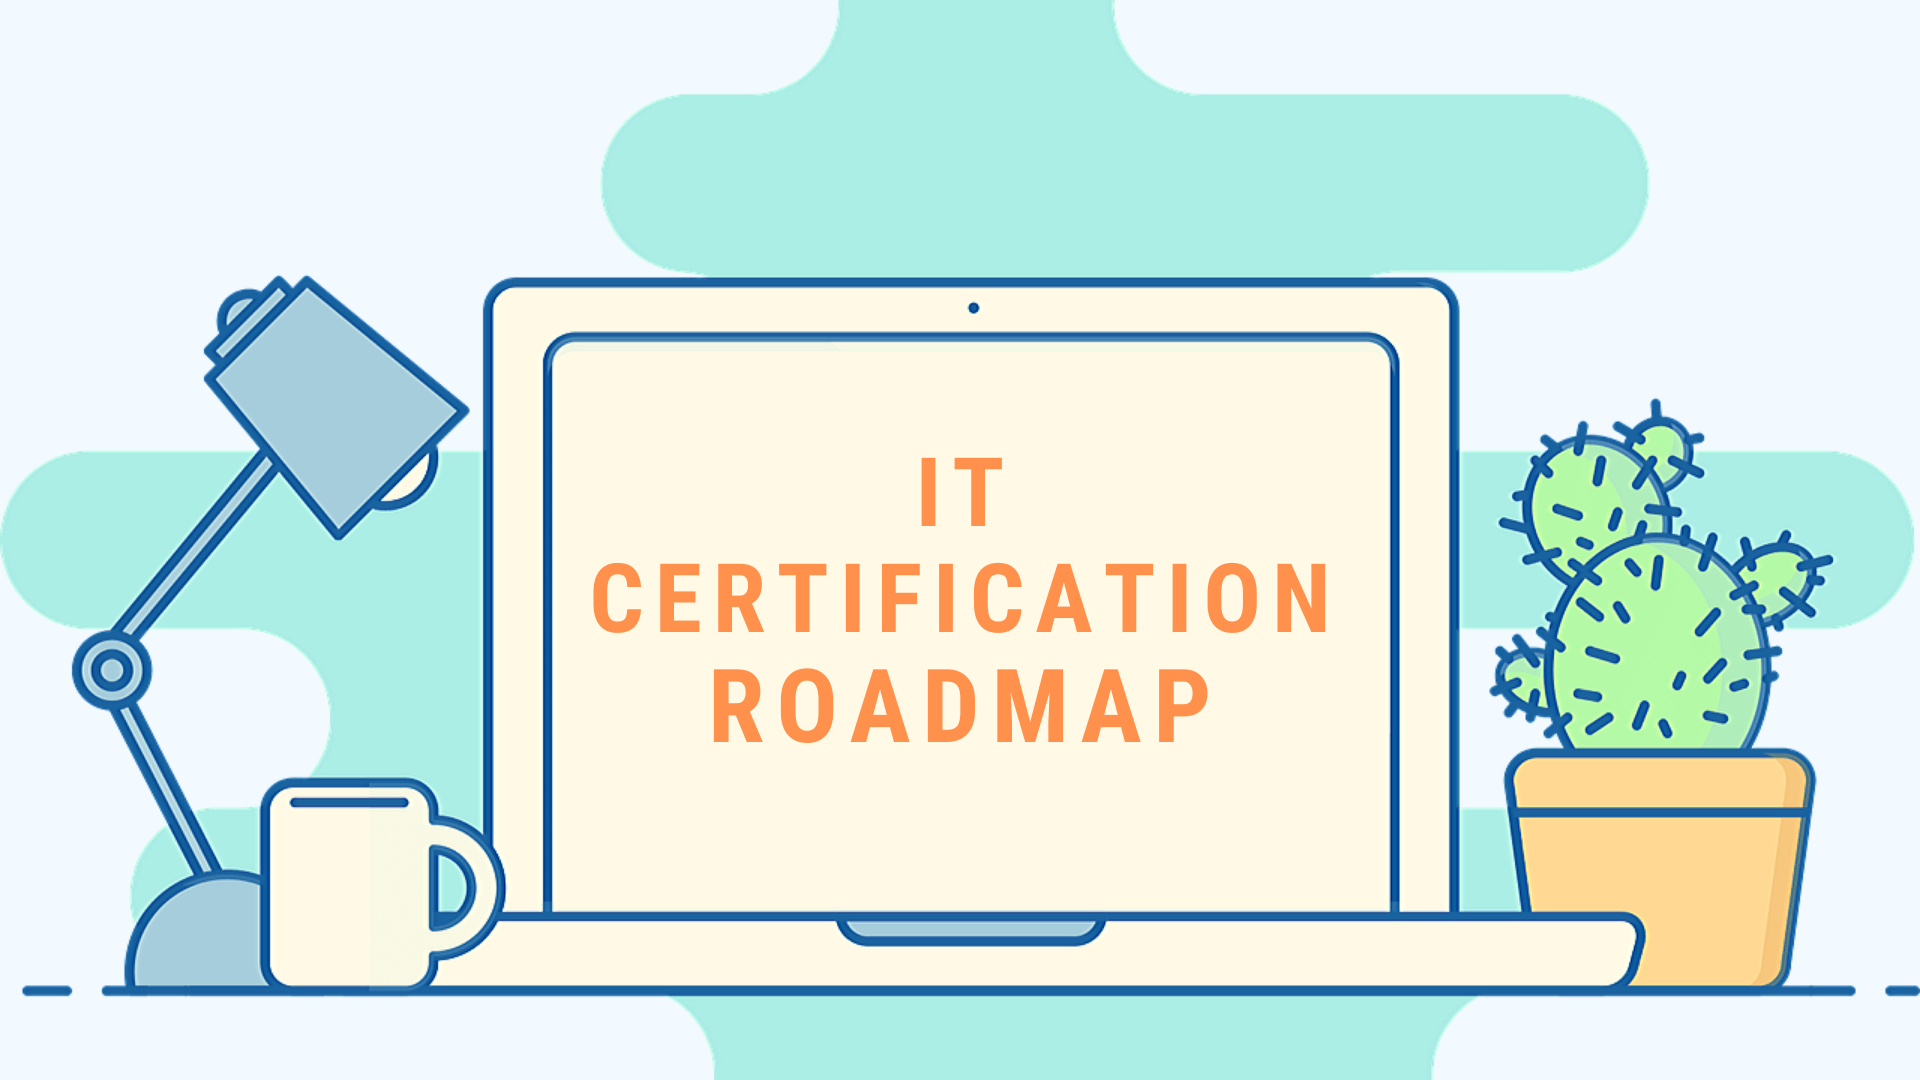 IT Certification Roadmap by CompTIA (2020)